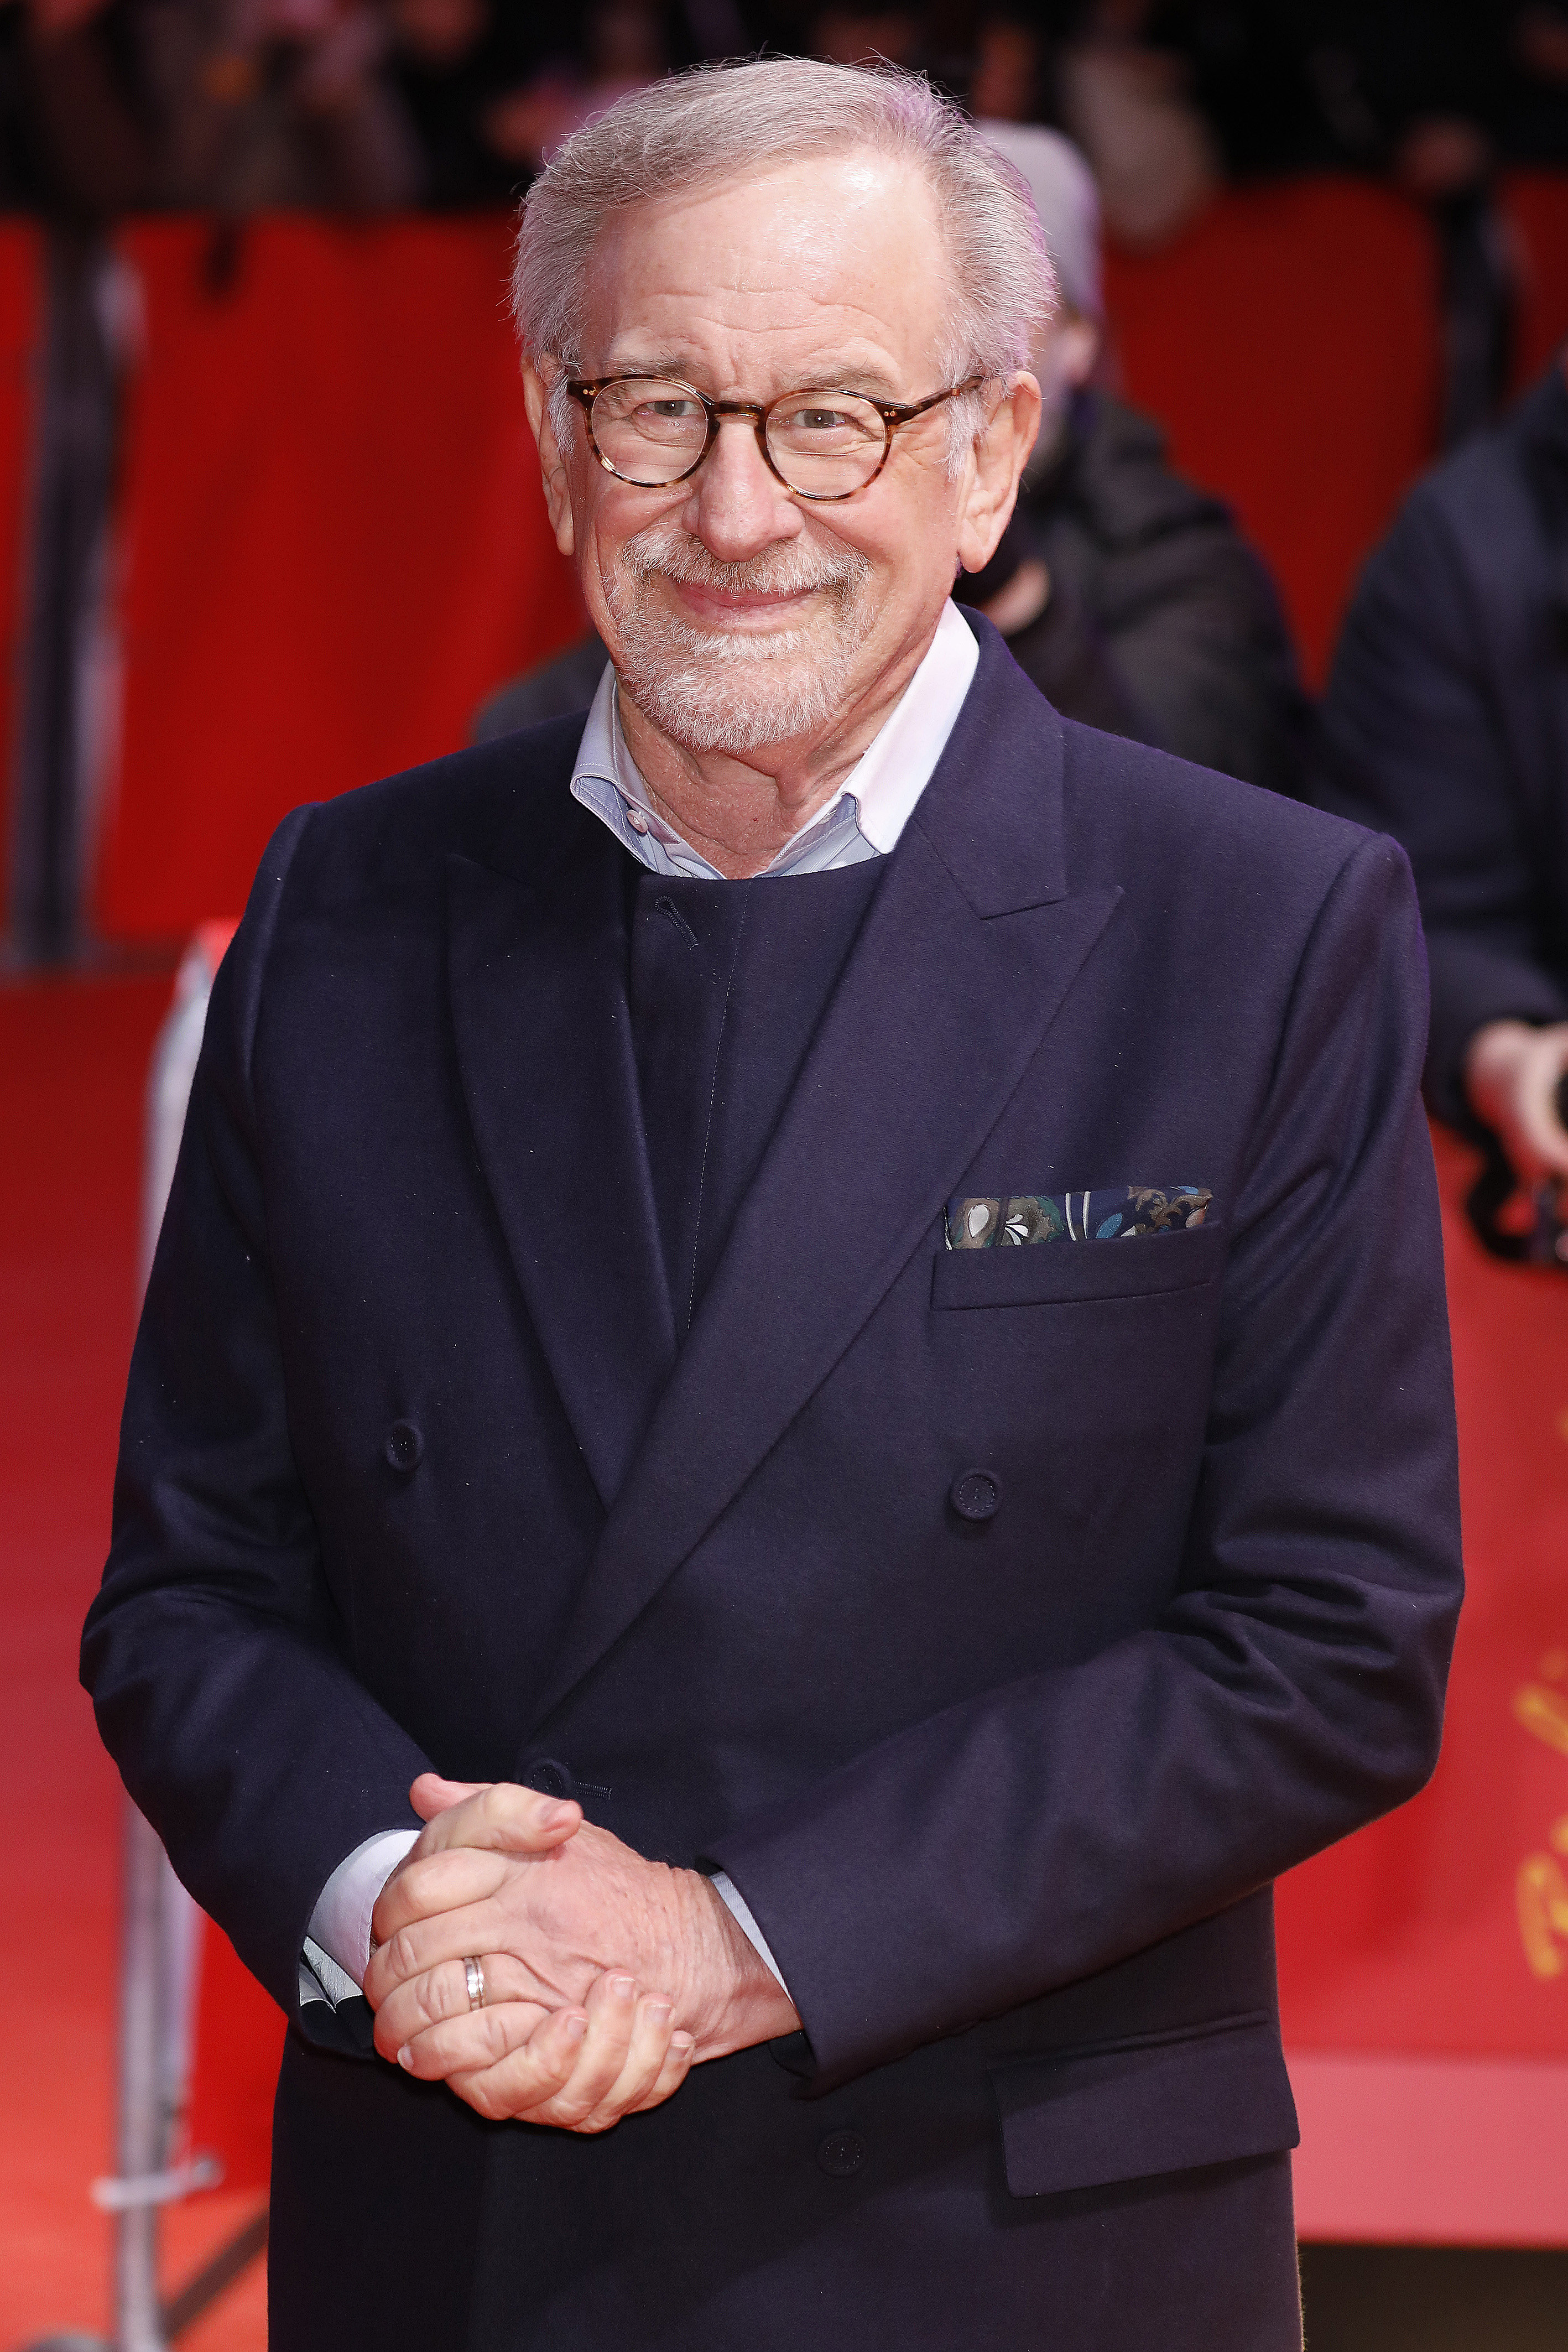 Steven Spielberg arrives at the red carpet of &#x27;The Fabelmans (Die Fabelmans)&#x27; premiere &amp;amp; Honorary Golden Bear and homage for Steven Spielberg&#x27; during the 73rd Berlin International Film Festival